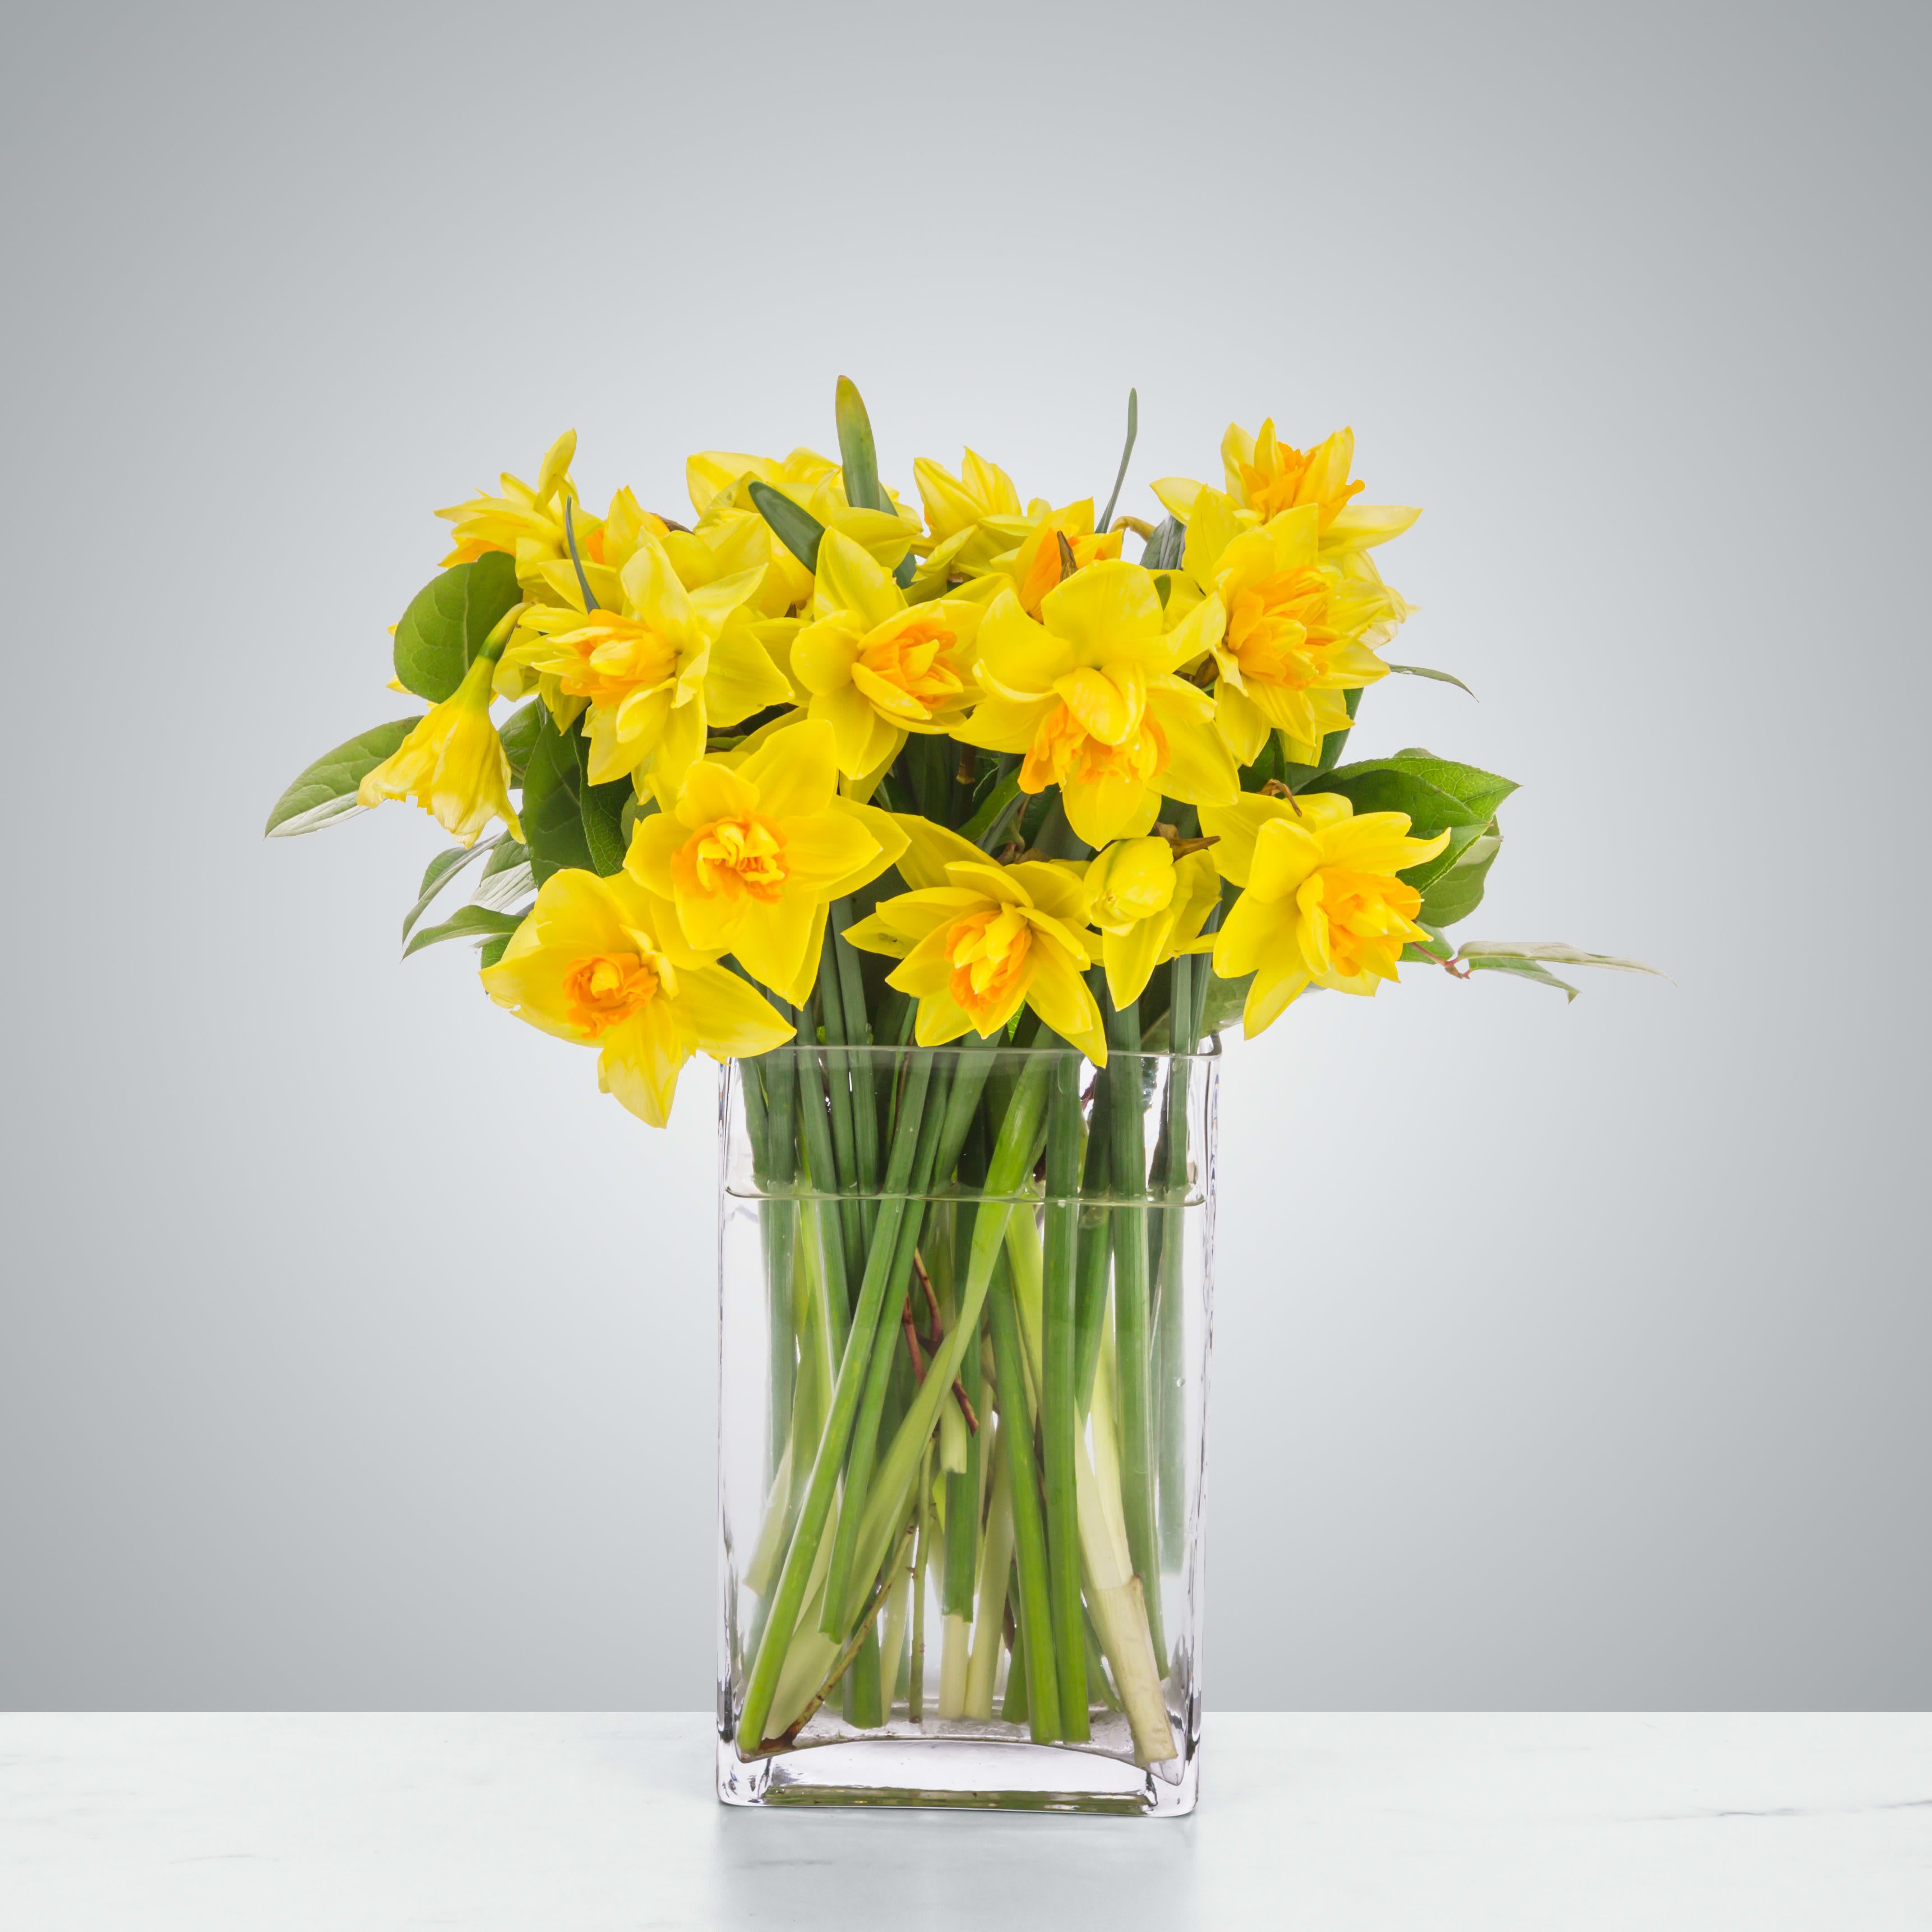 Darling Daffodils by BloomNation™ - Daffodils are one of the first flowers of spring and a great way to celebrate the start of a new beginning! Send Daffodils as a gift for Passover, Easter, or to celebrate the Spring Equinox.  1st Image: Standard 2nd Image: Premium